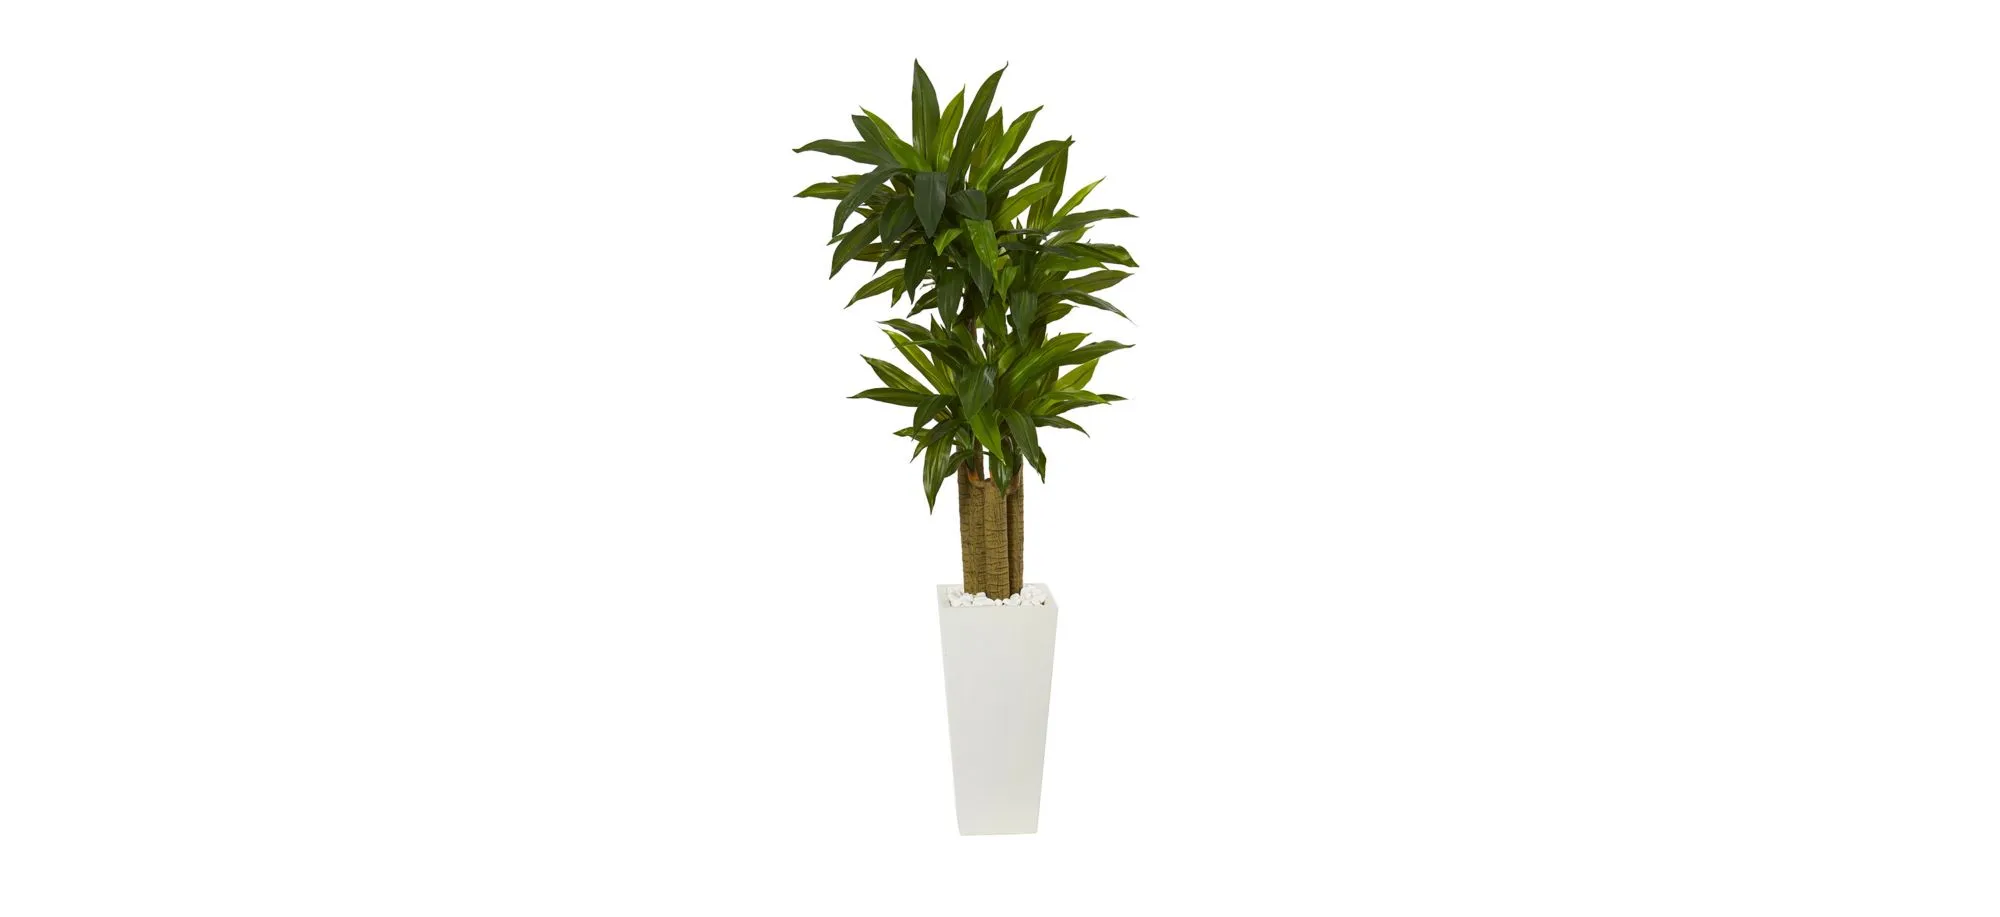 5ft. Cornstalk Dracaena Artificial Plant in White Tower Planter in Green by Bellanest